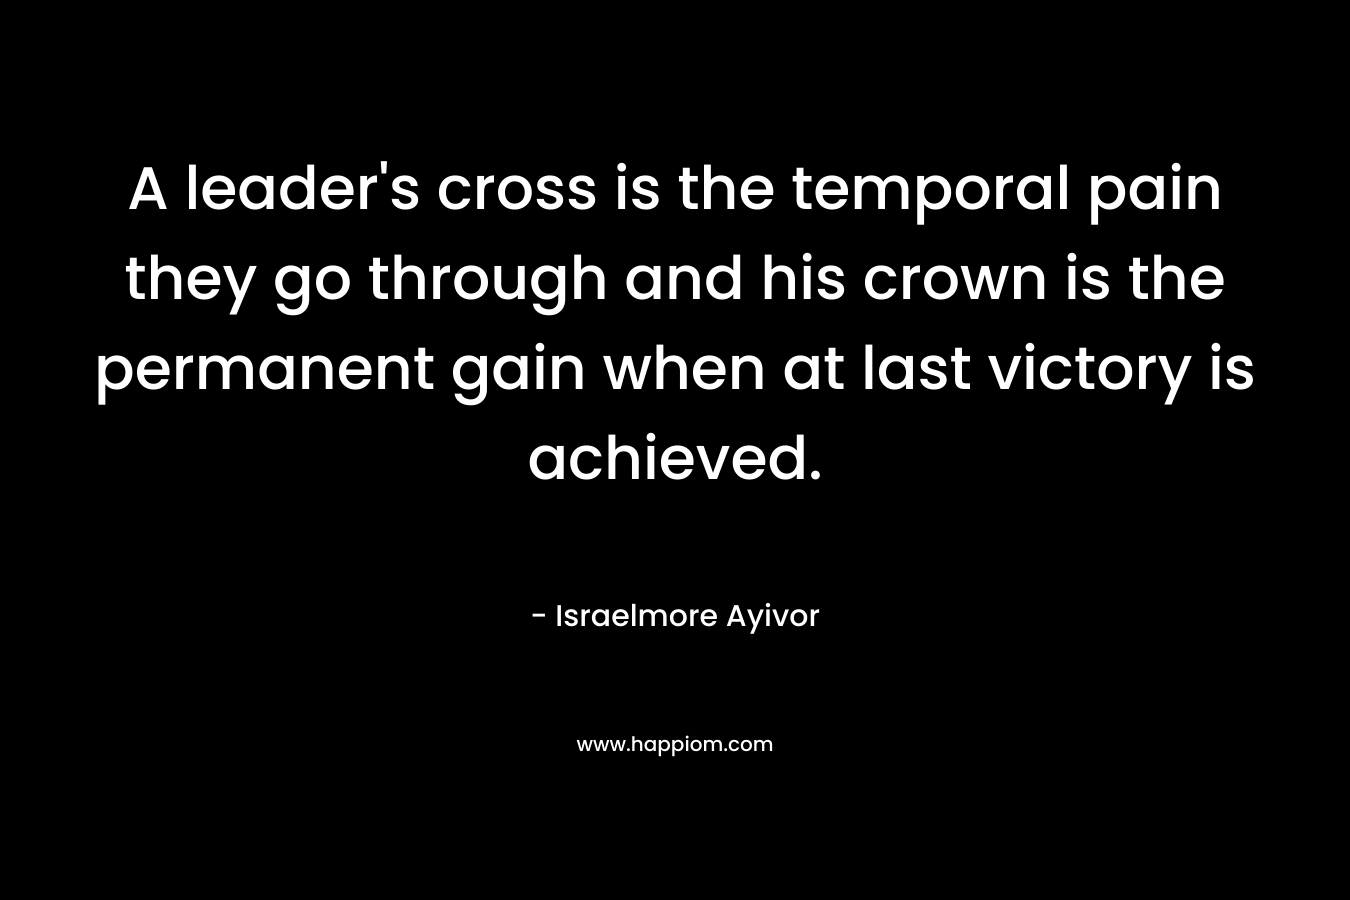 A leader's cross is the temporal pain they go through and his crown is the permanent gain when at last victory is achieved.